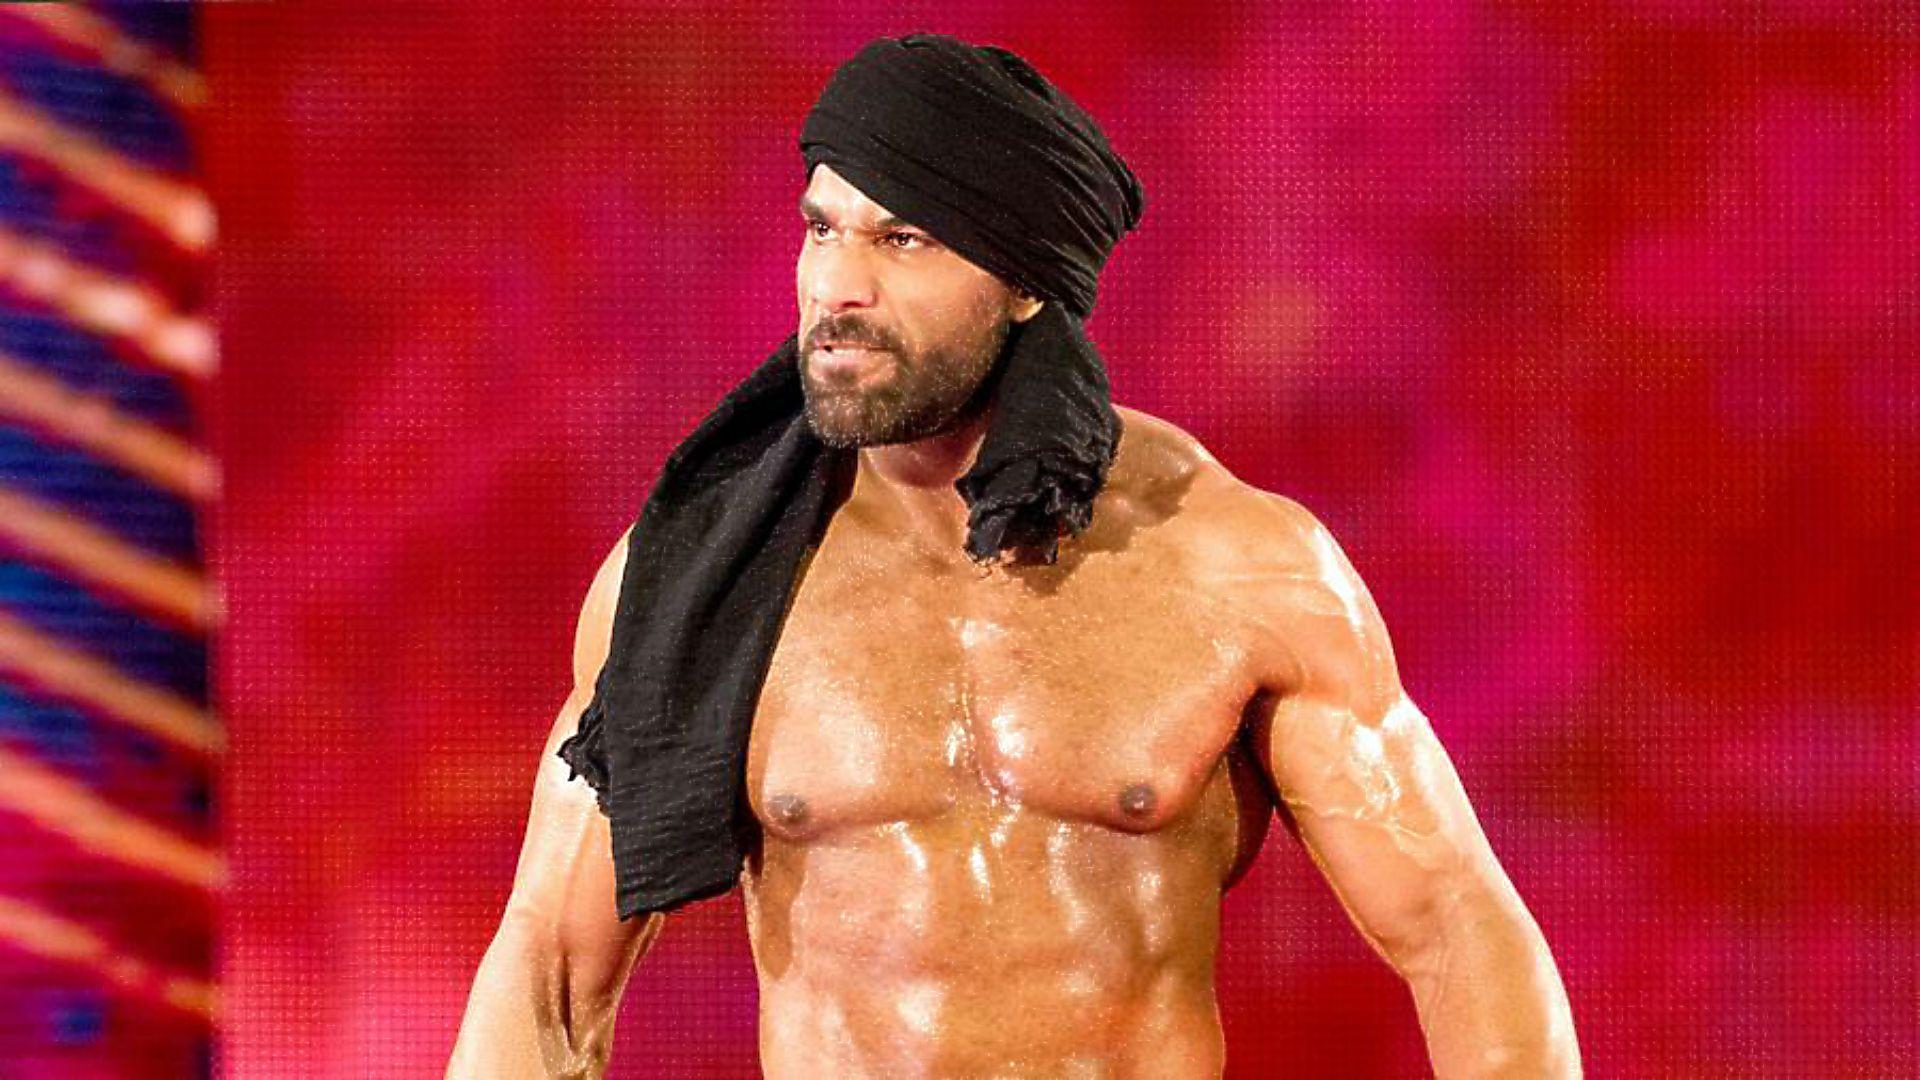 WWE 'SummerSlam' 2017: Jinder Mahal discusses his unique rise to